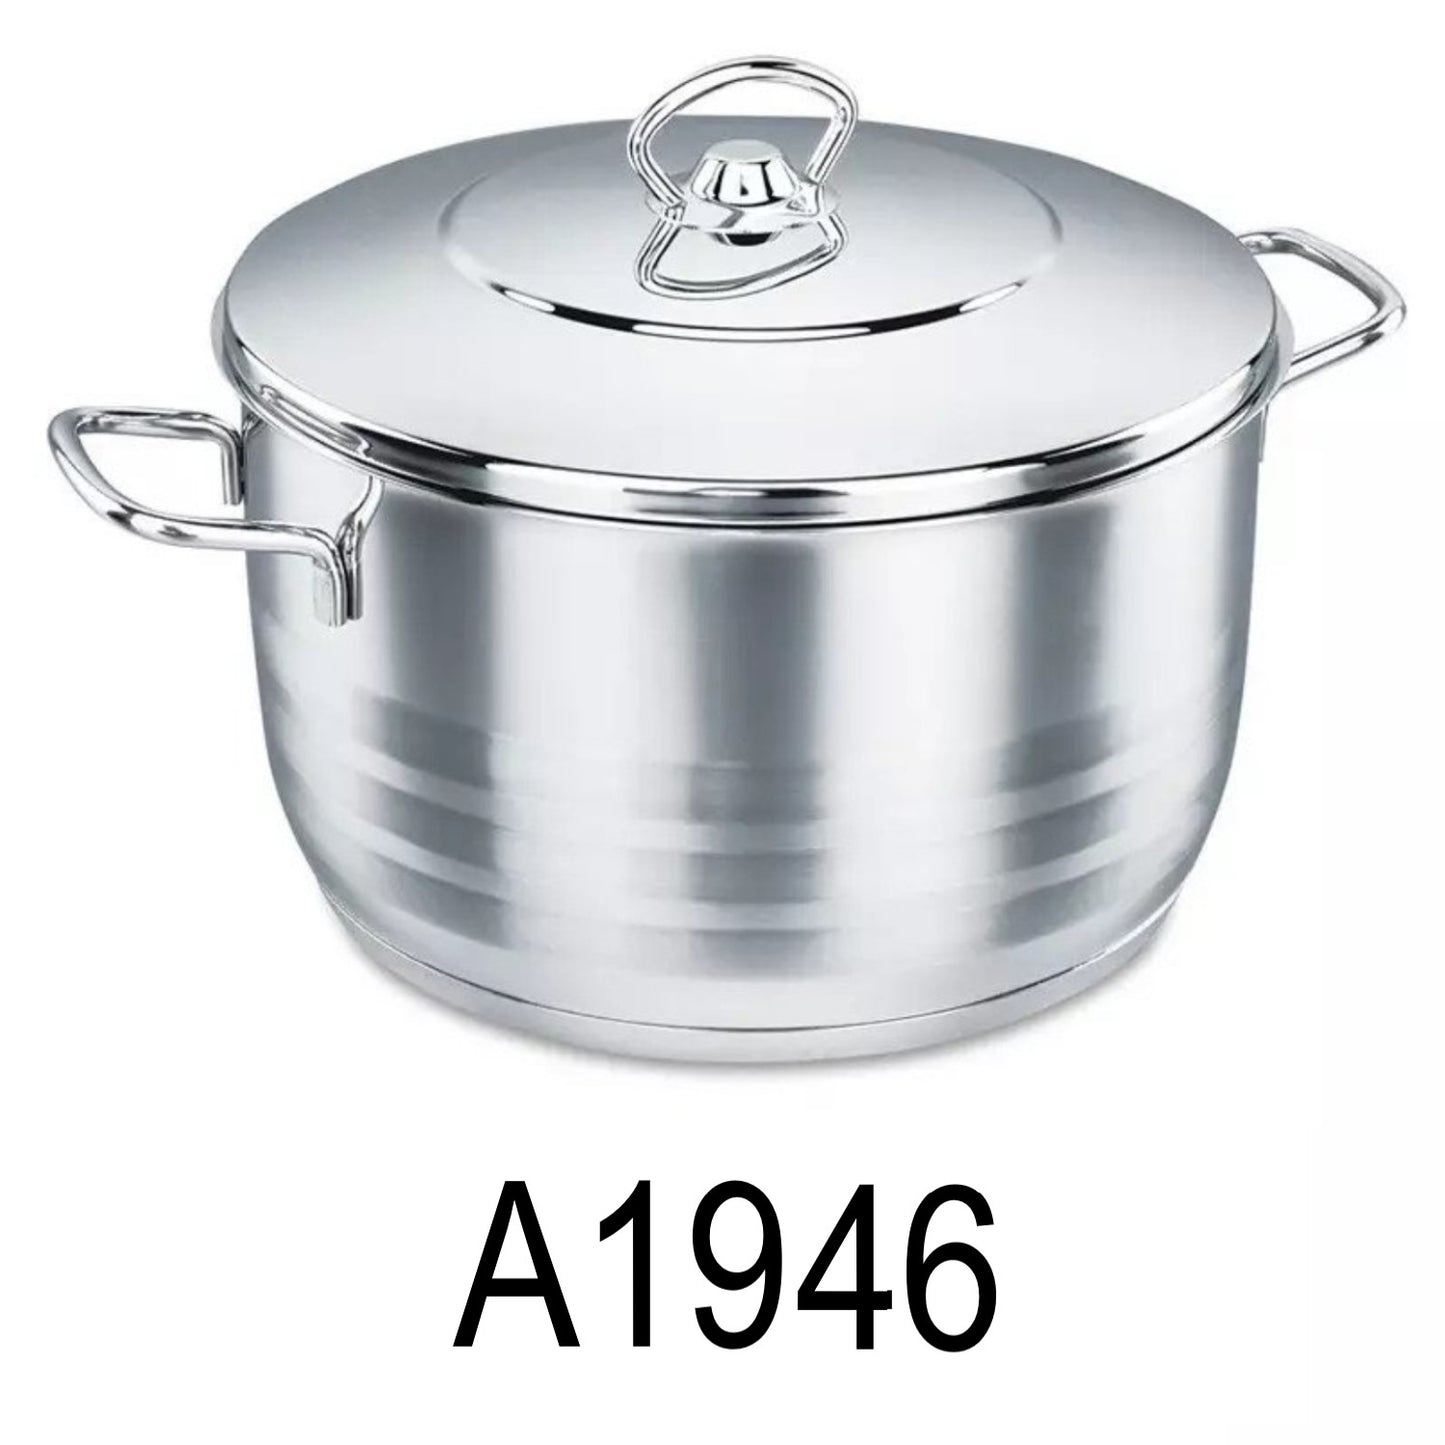 20L Stainless Steel Stockpot